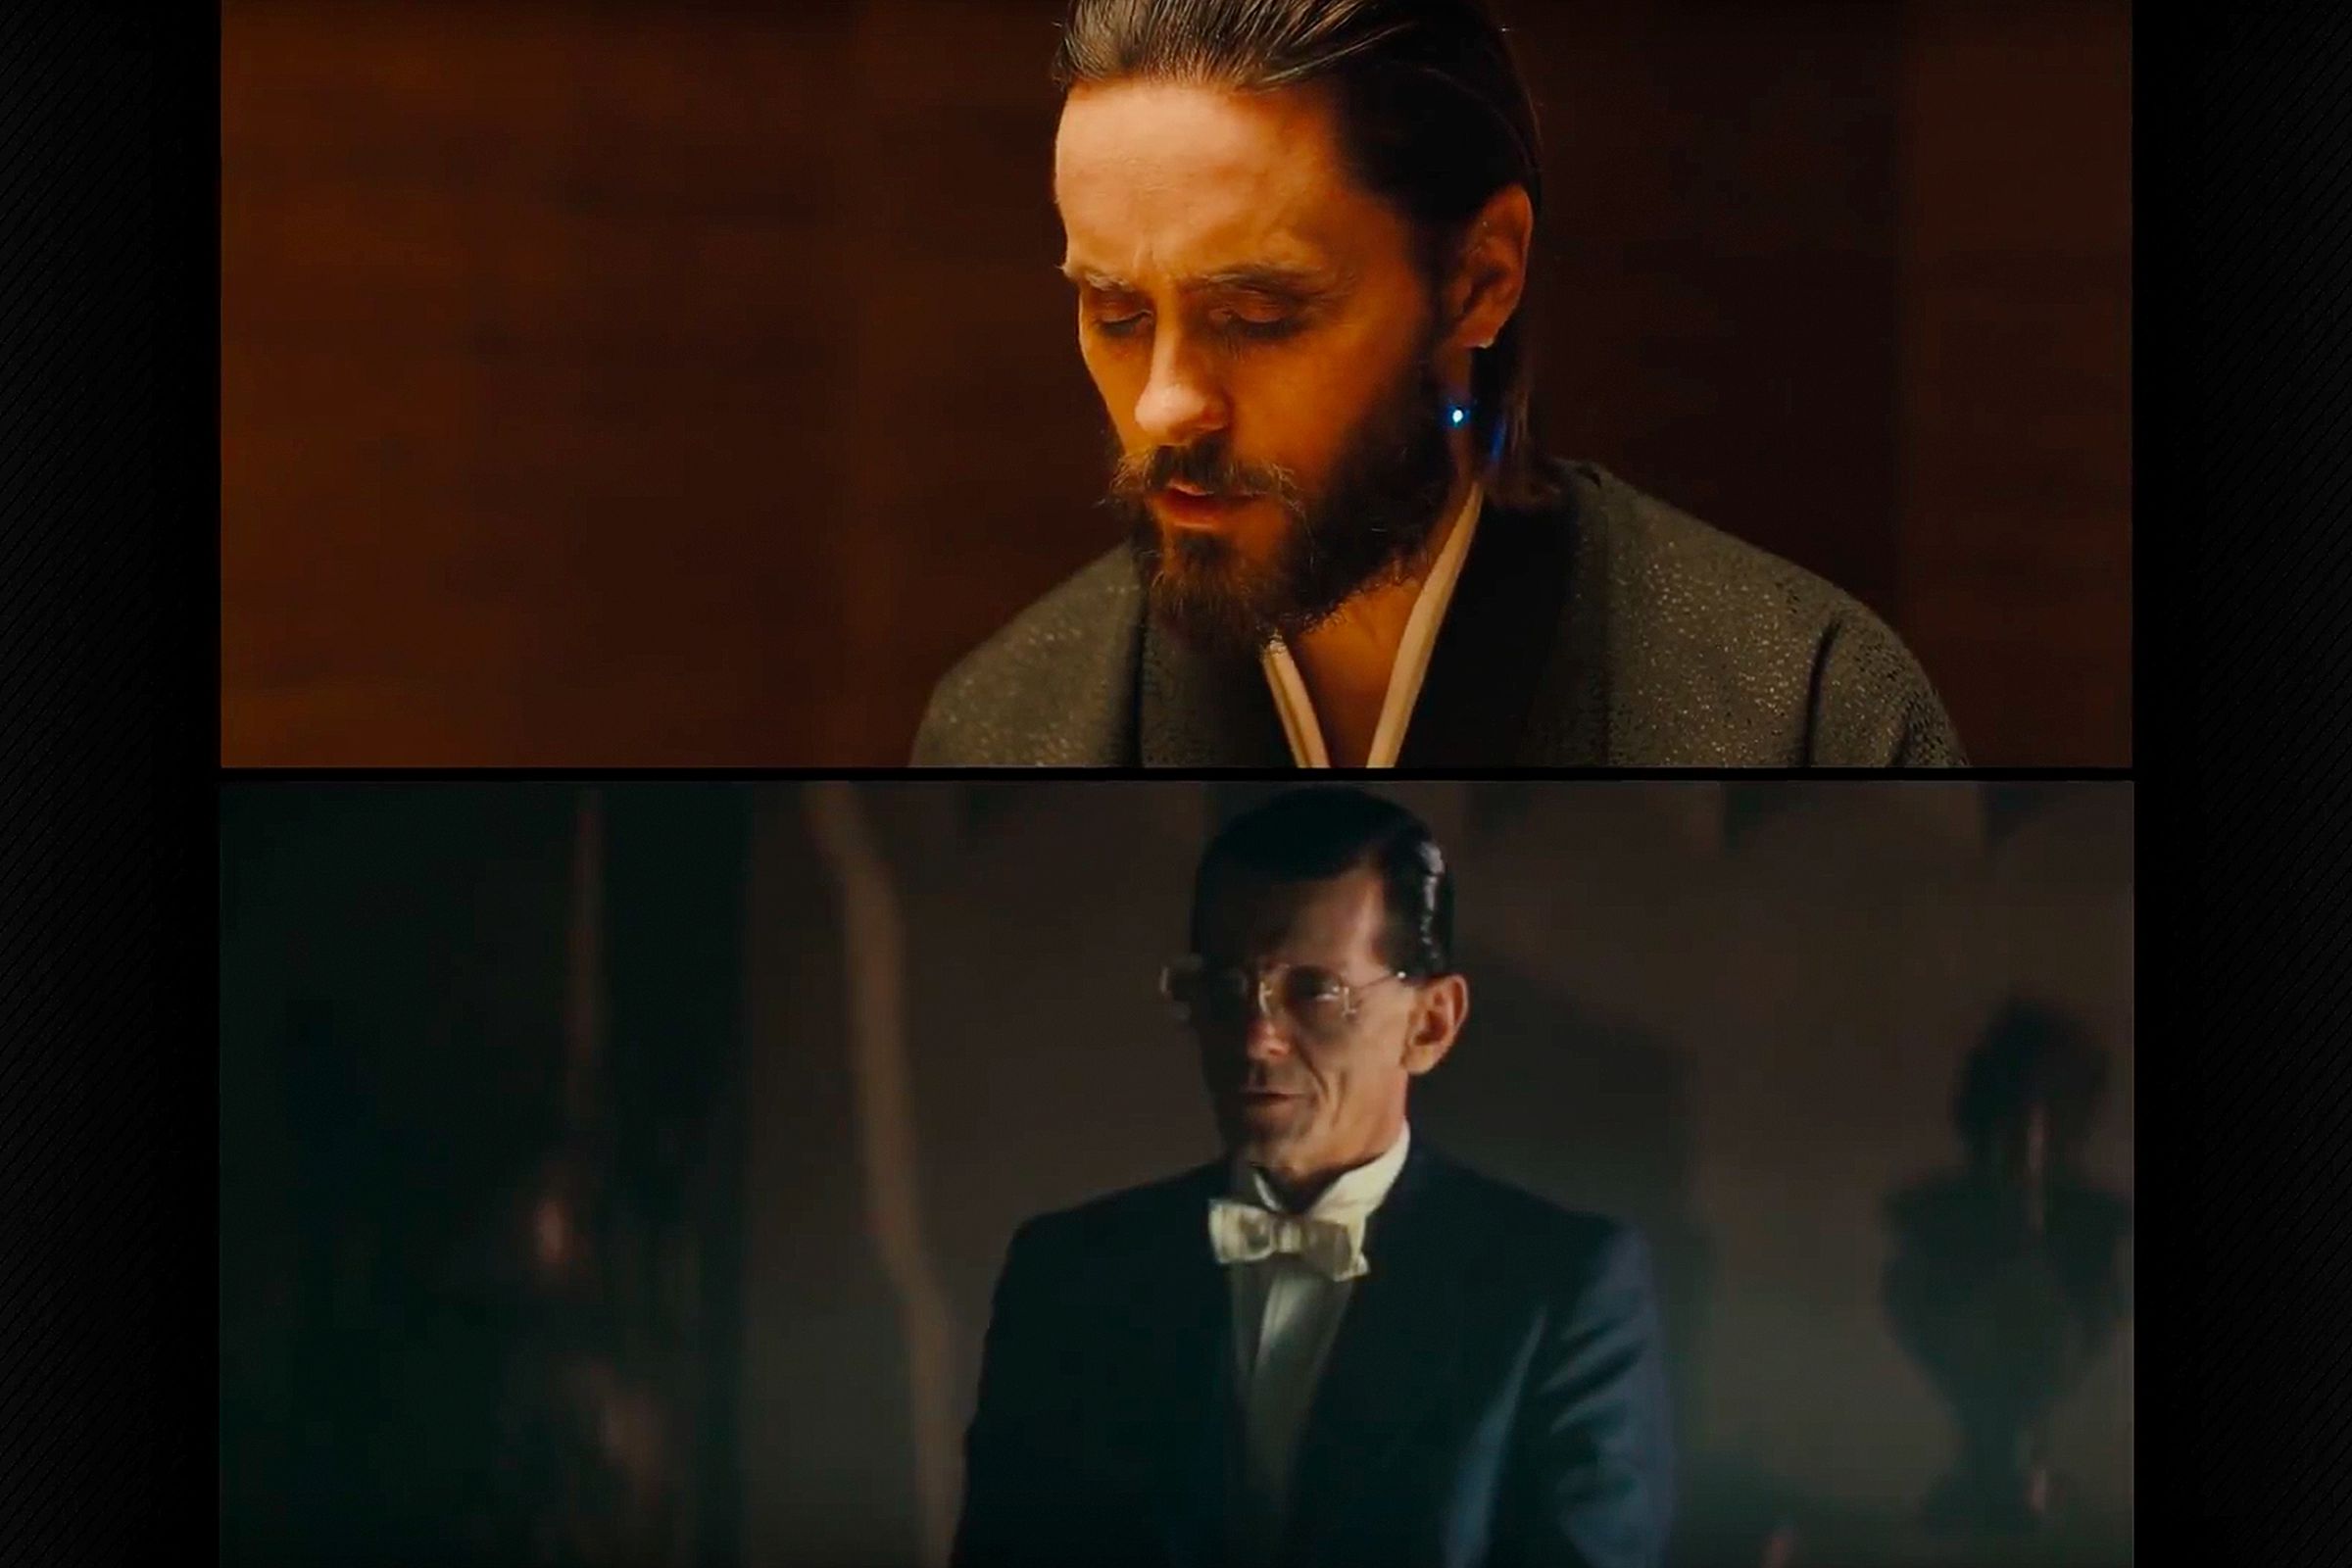 Top: Blade Runner 2049, “Wallace” lit from the top. Bottom: Original Blade Runner, Tyrell lit with bounced light reflected off water.